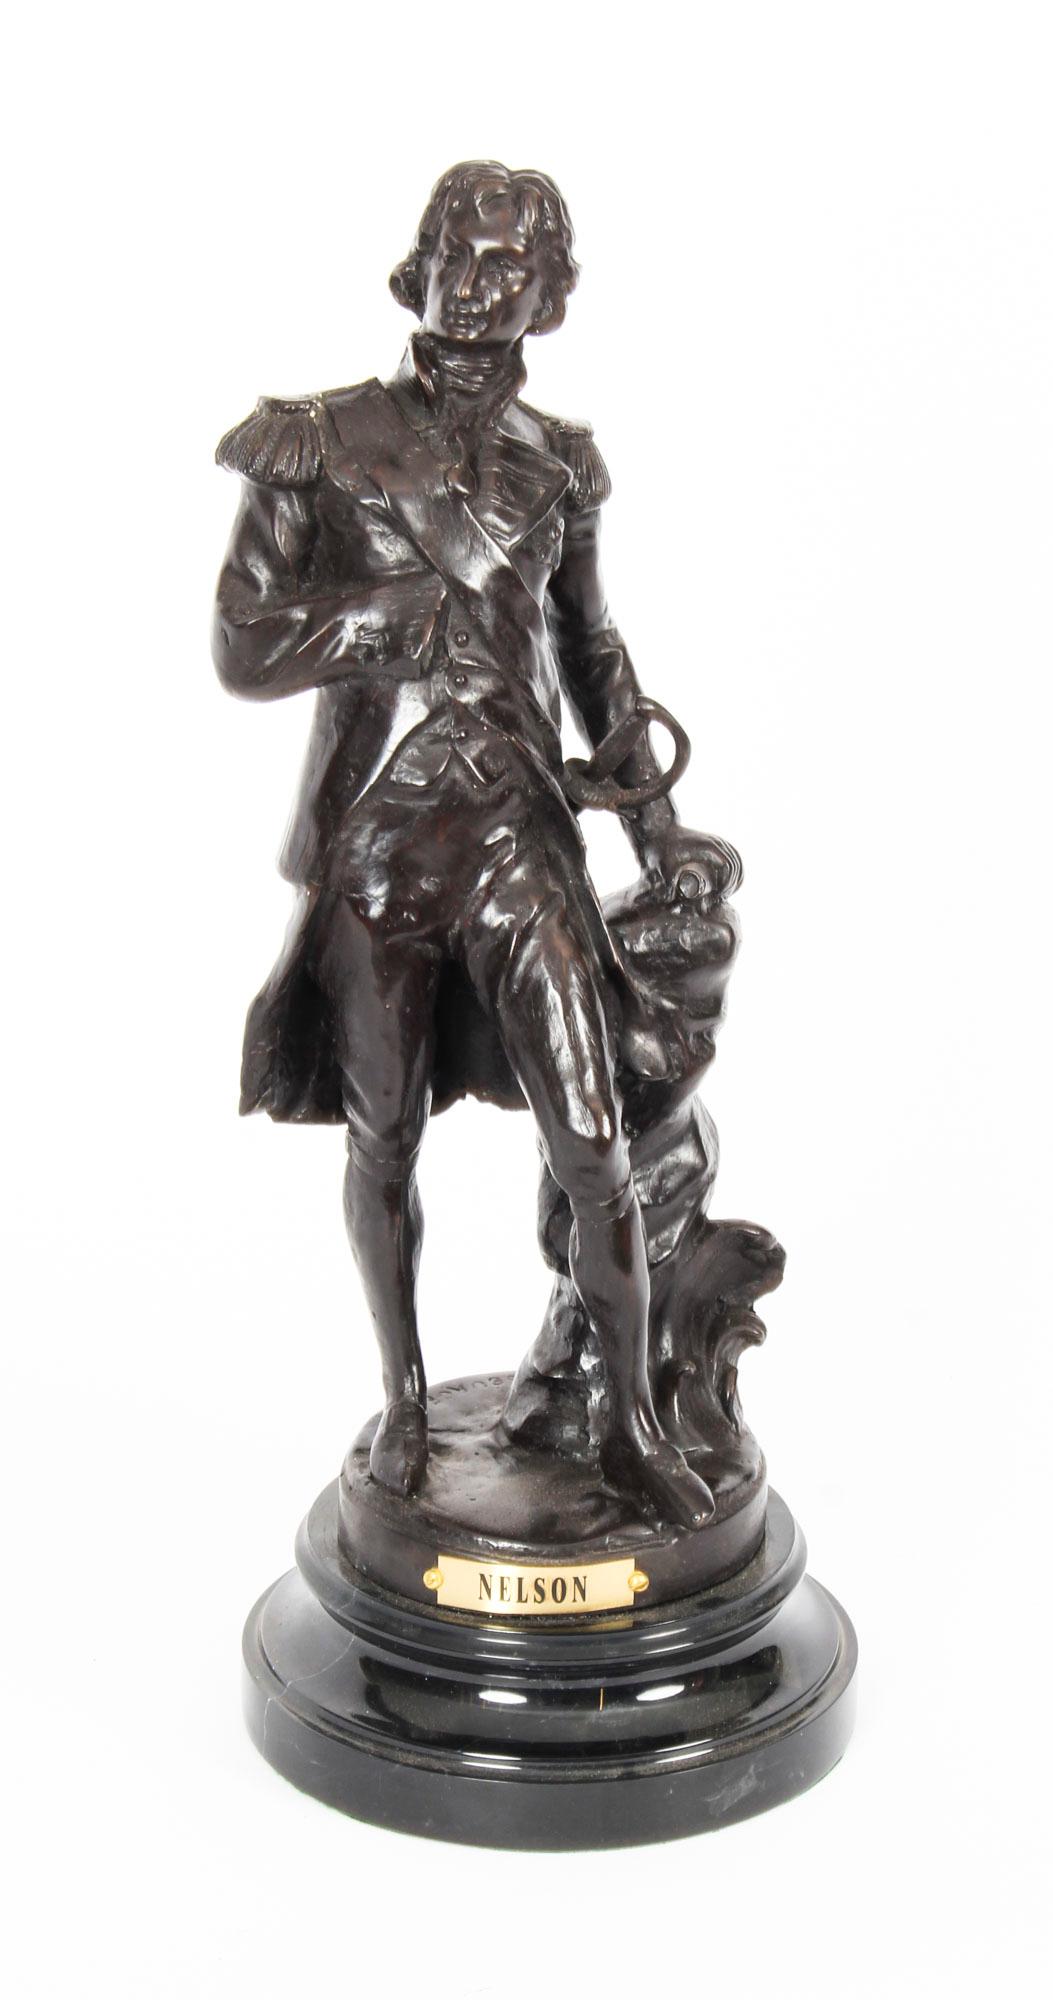 Vintage Bronze Sculpture of Nelson 20th Century For Sale 11